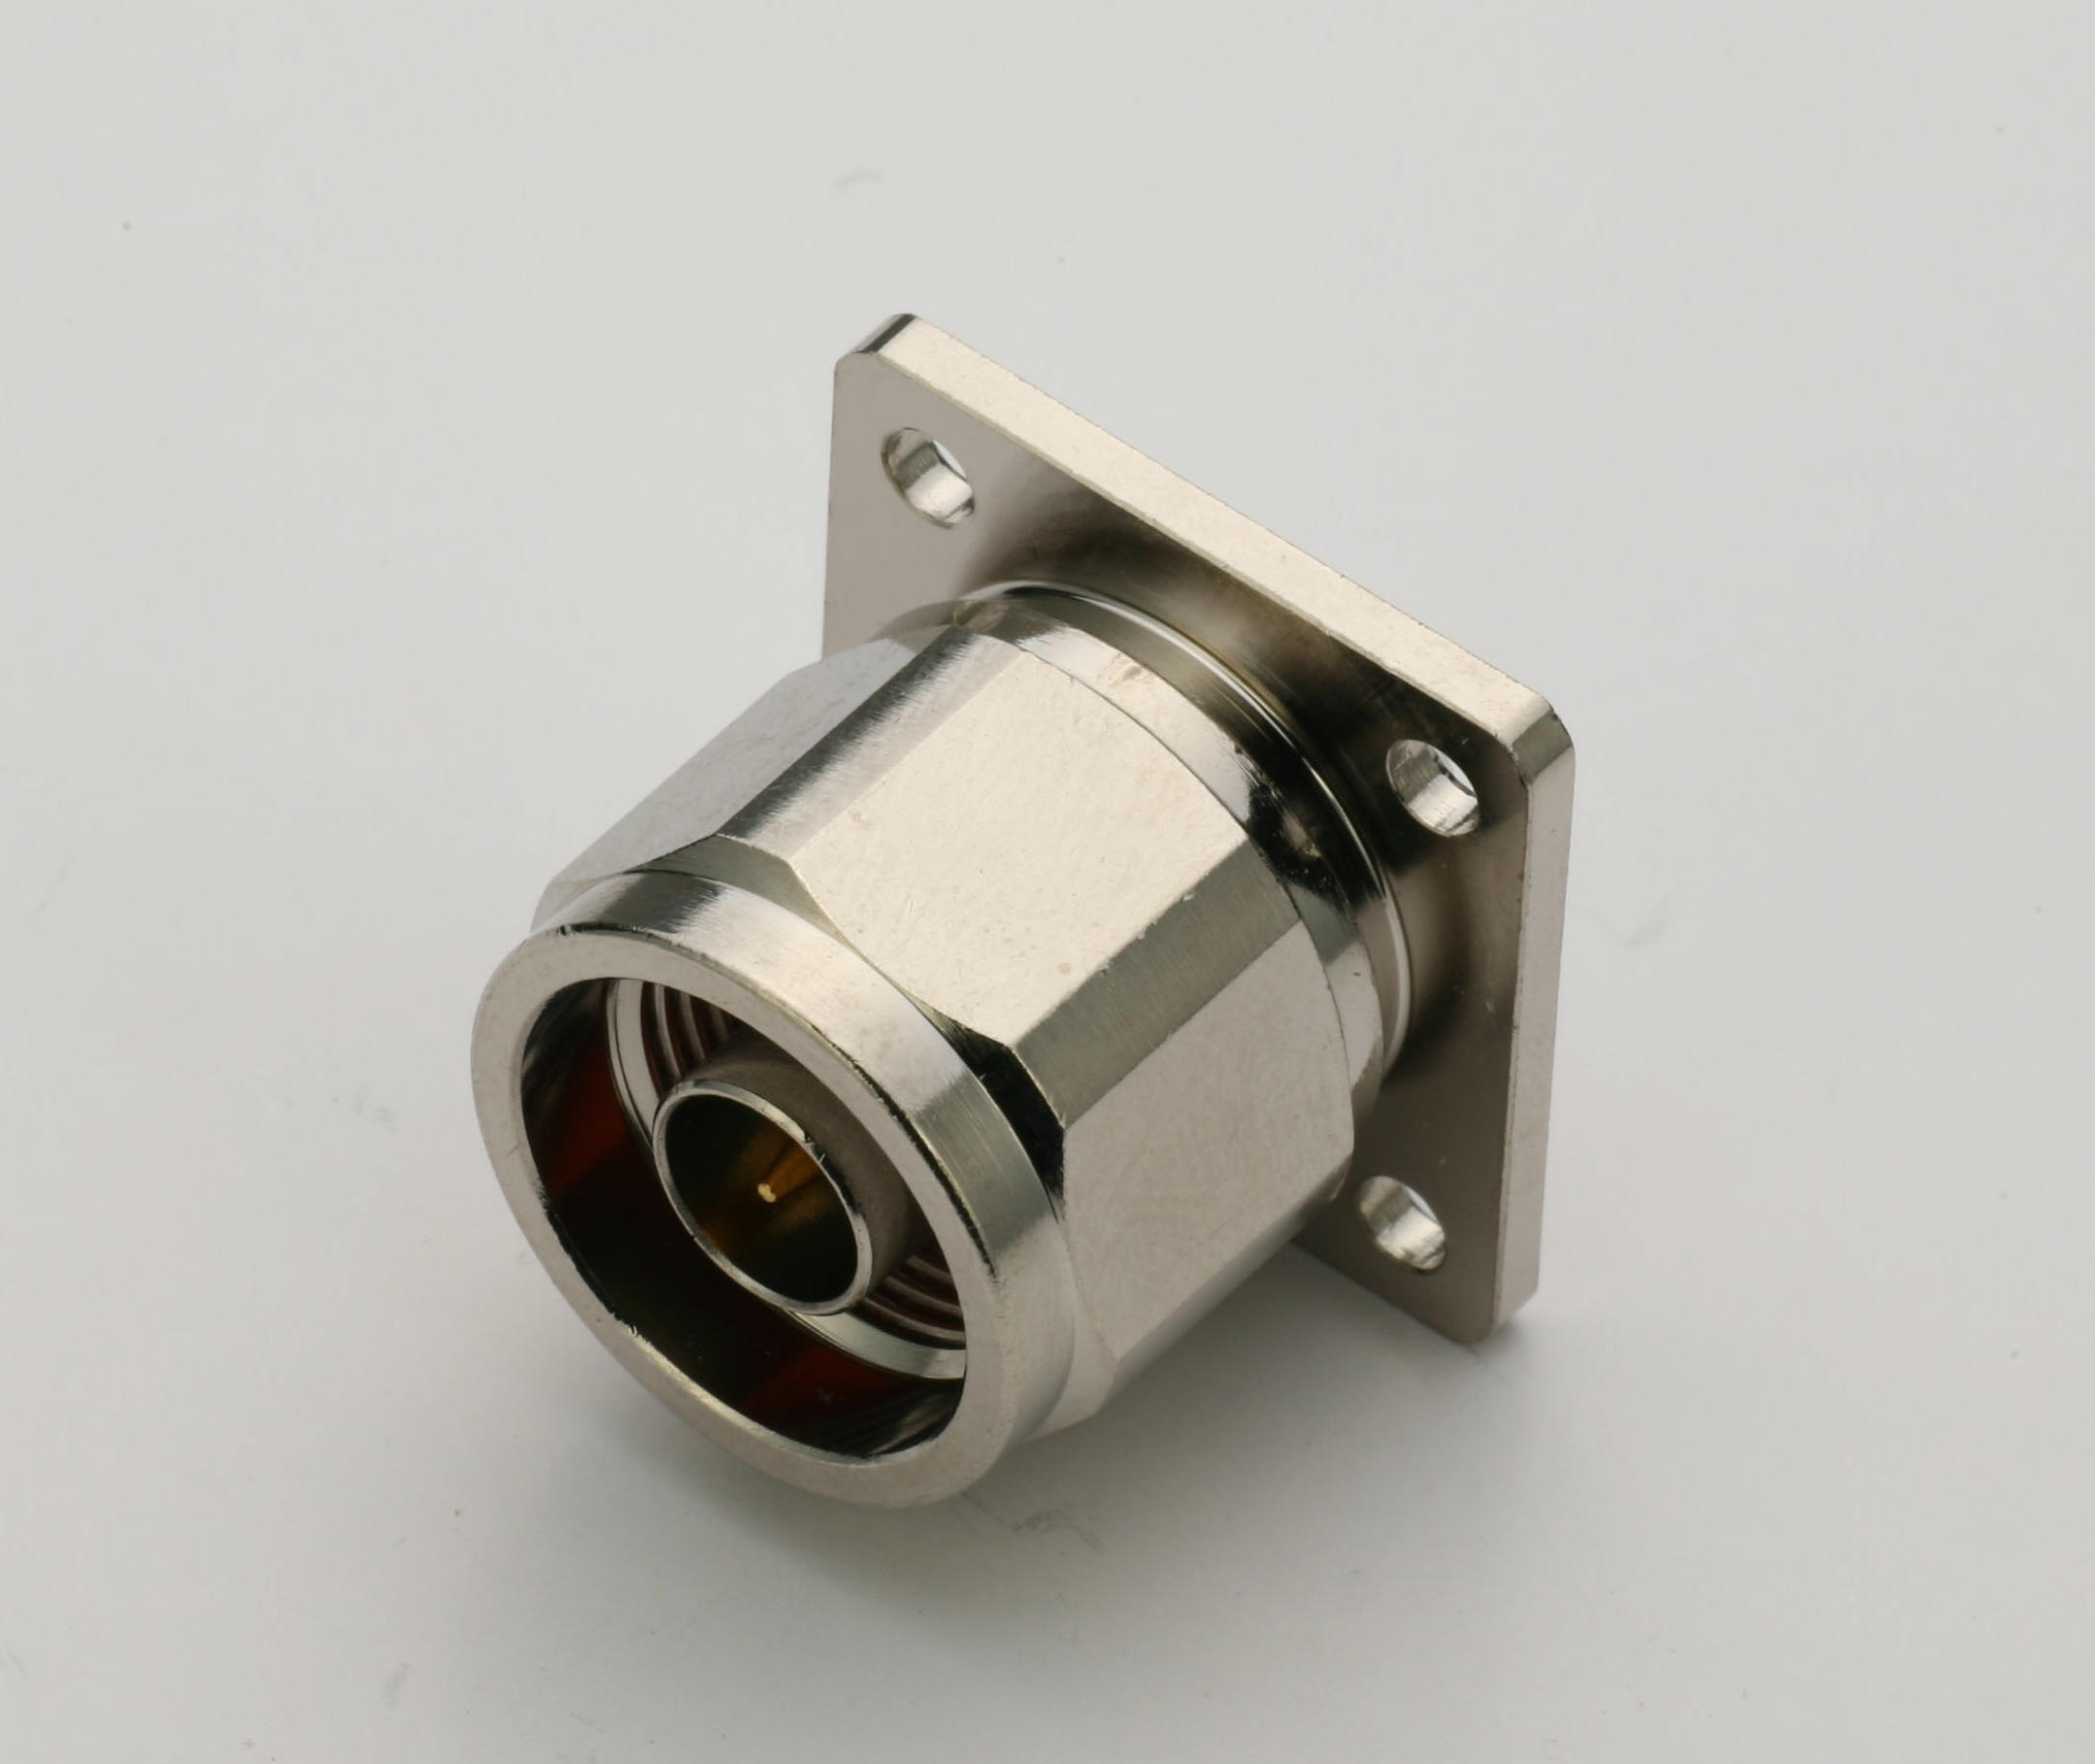 N Receptacle Plug for 4 Mounting Holes